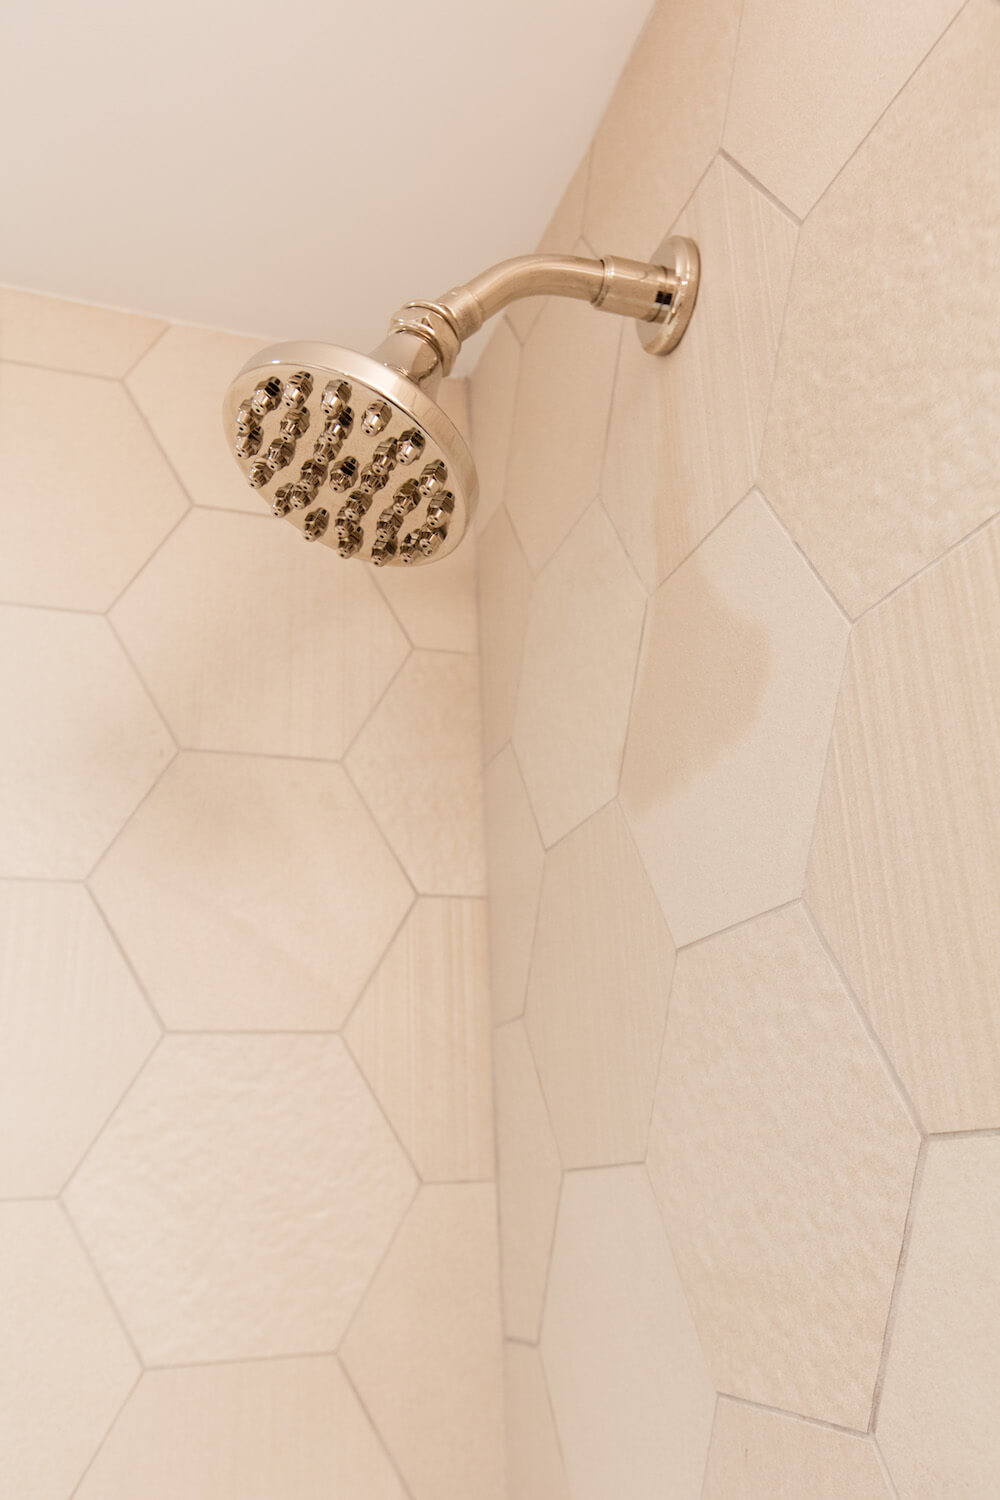 Matte gold showerhead with hexagon tiles for shower wall after renovation